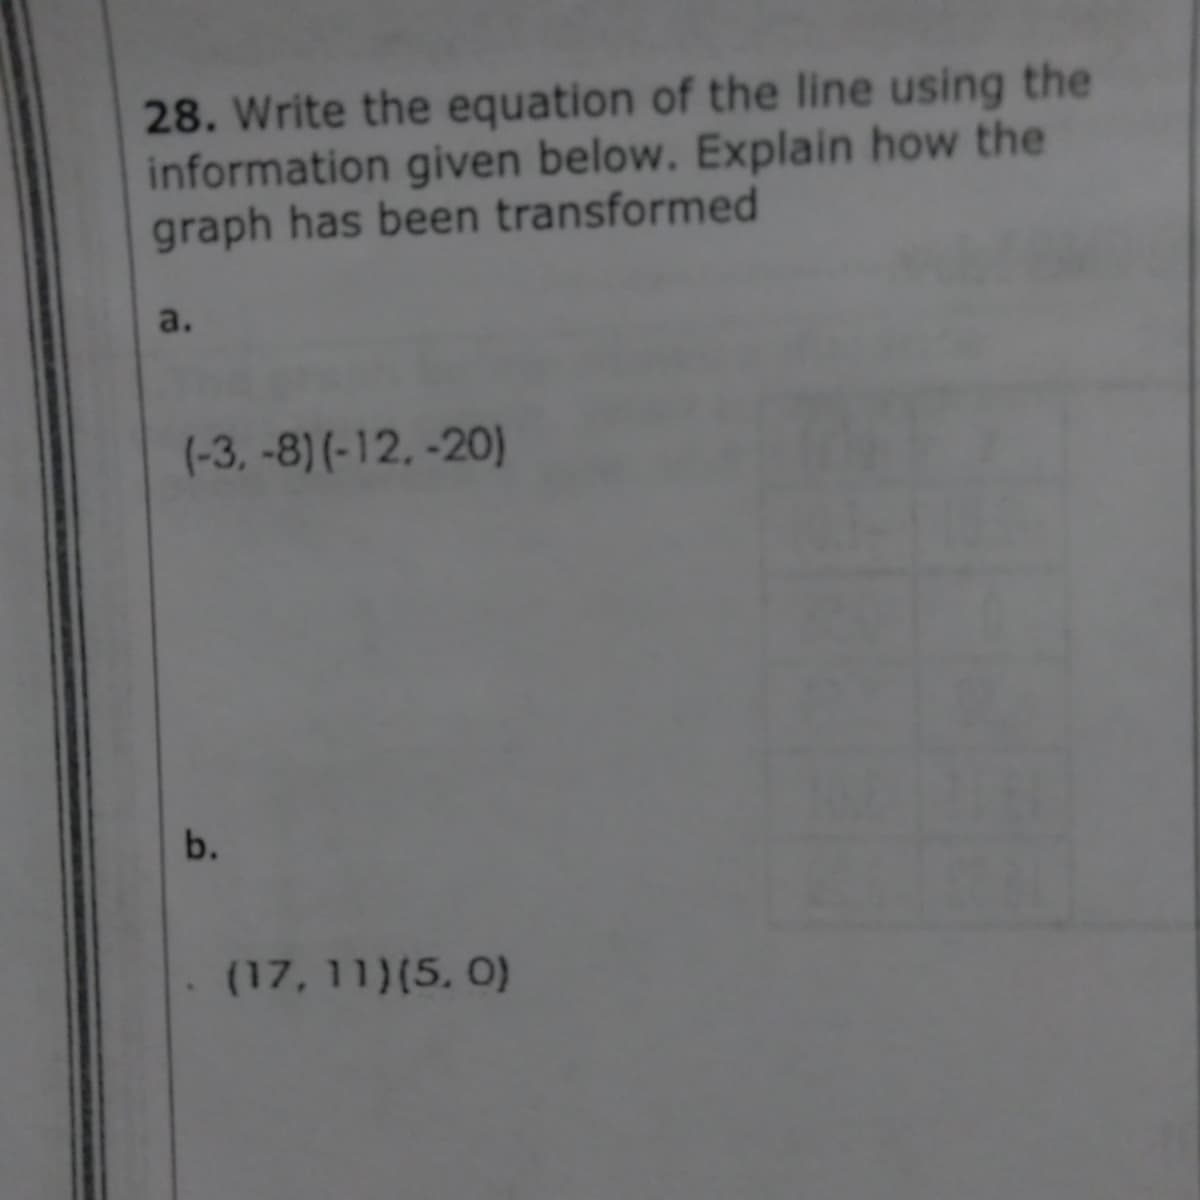 28. Write the equation of the line using the
information given below. Explain how the
graph has been transformed
a.
(-3, -8) (- 12, -20)
b.
(17, 11)(5. 0)
